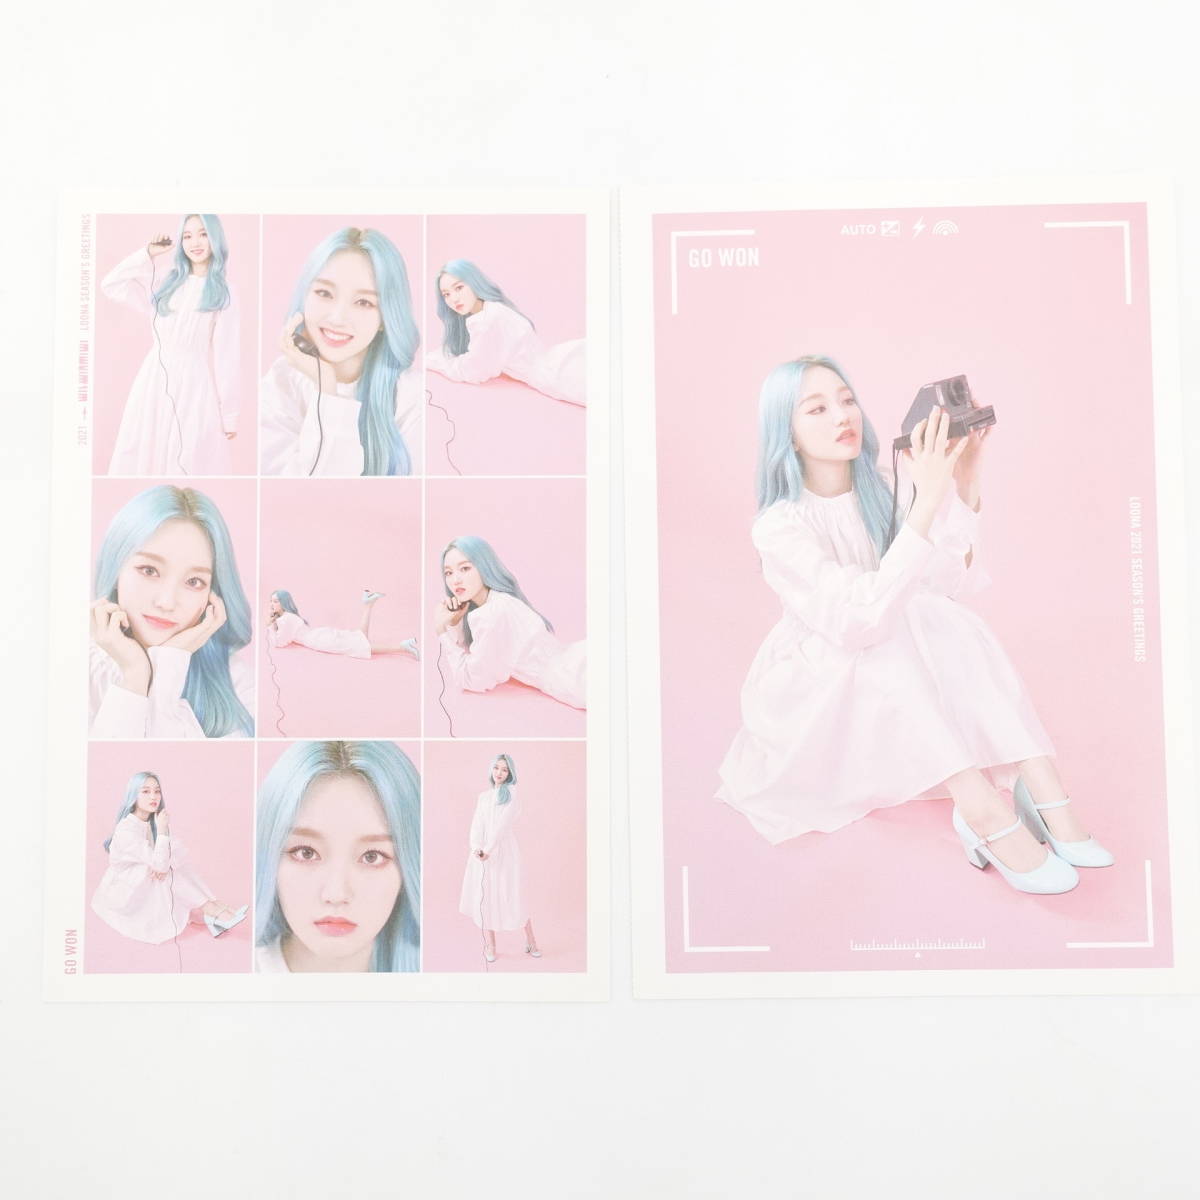  this month. young lady go .nsi- Gris card photo trading card /2021 SEASON\'S GREETINGS/LOONA/Go Won/10874